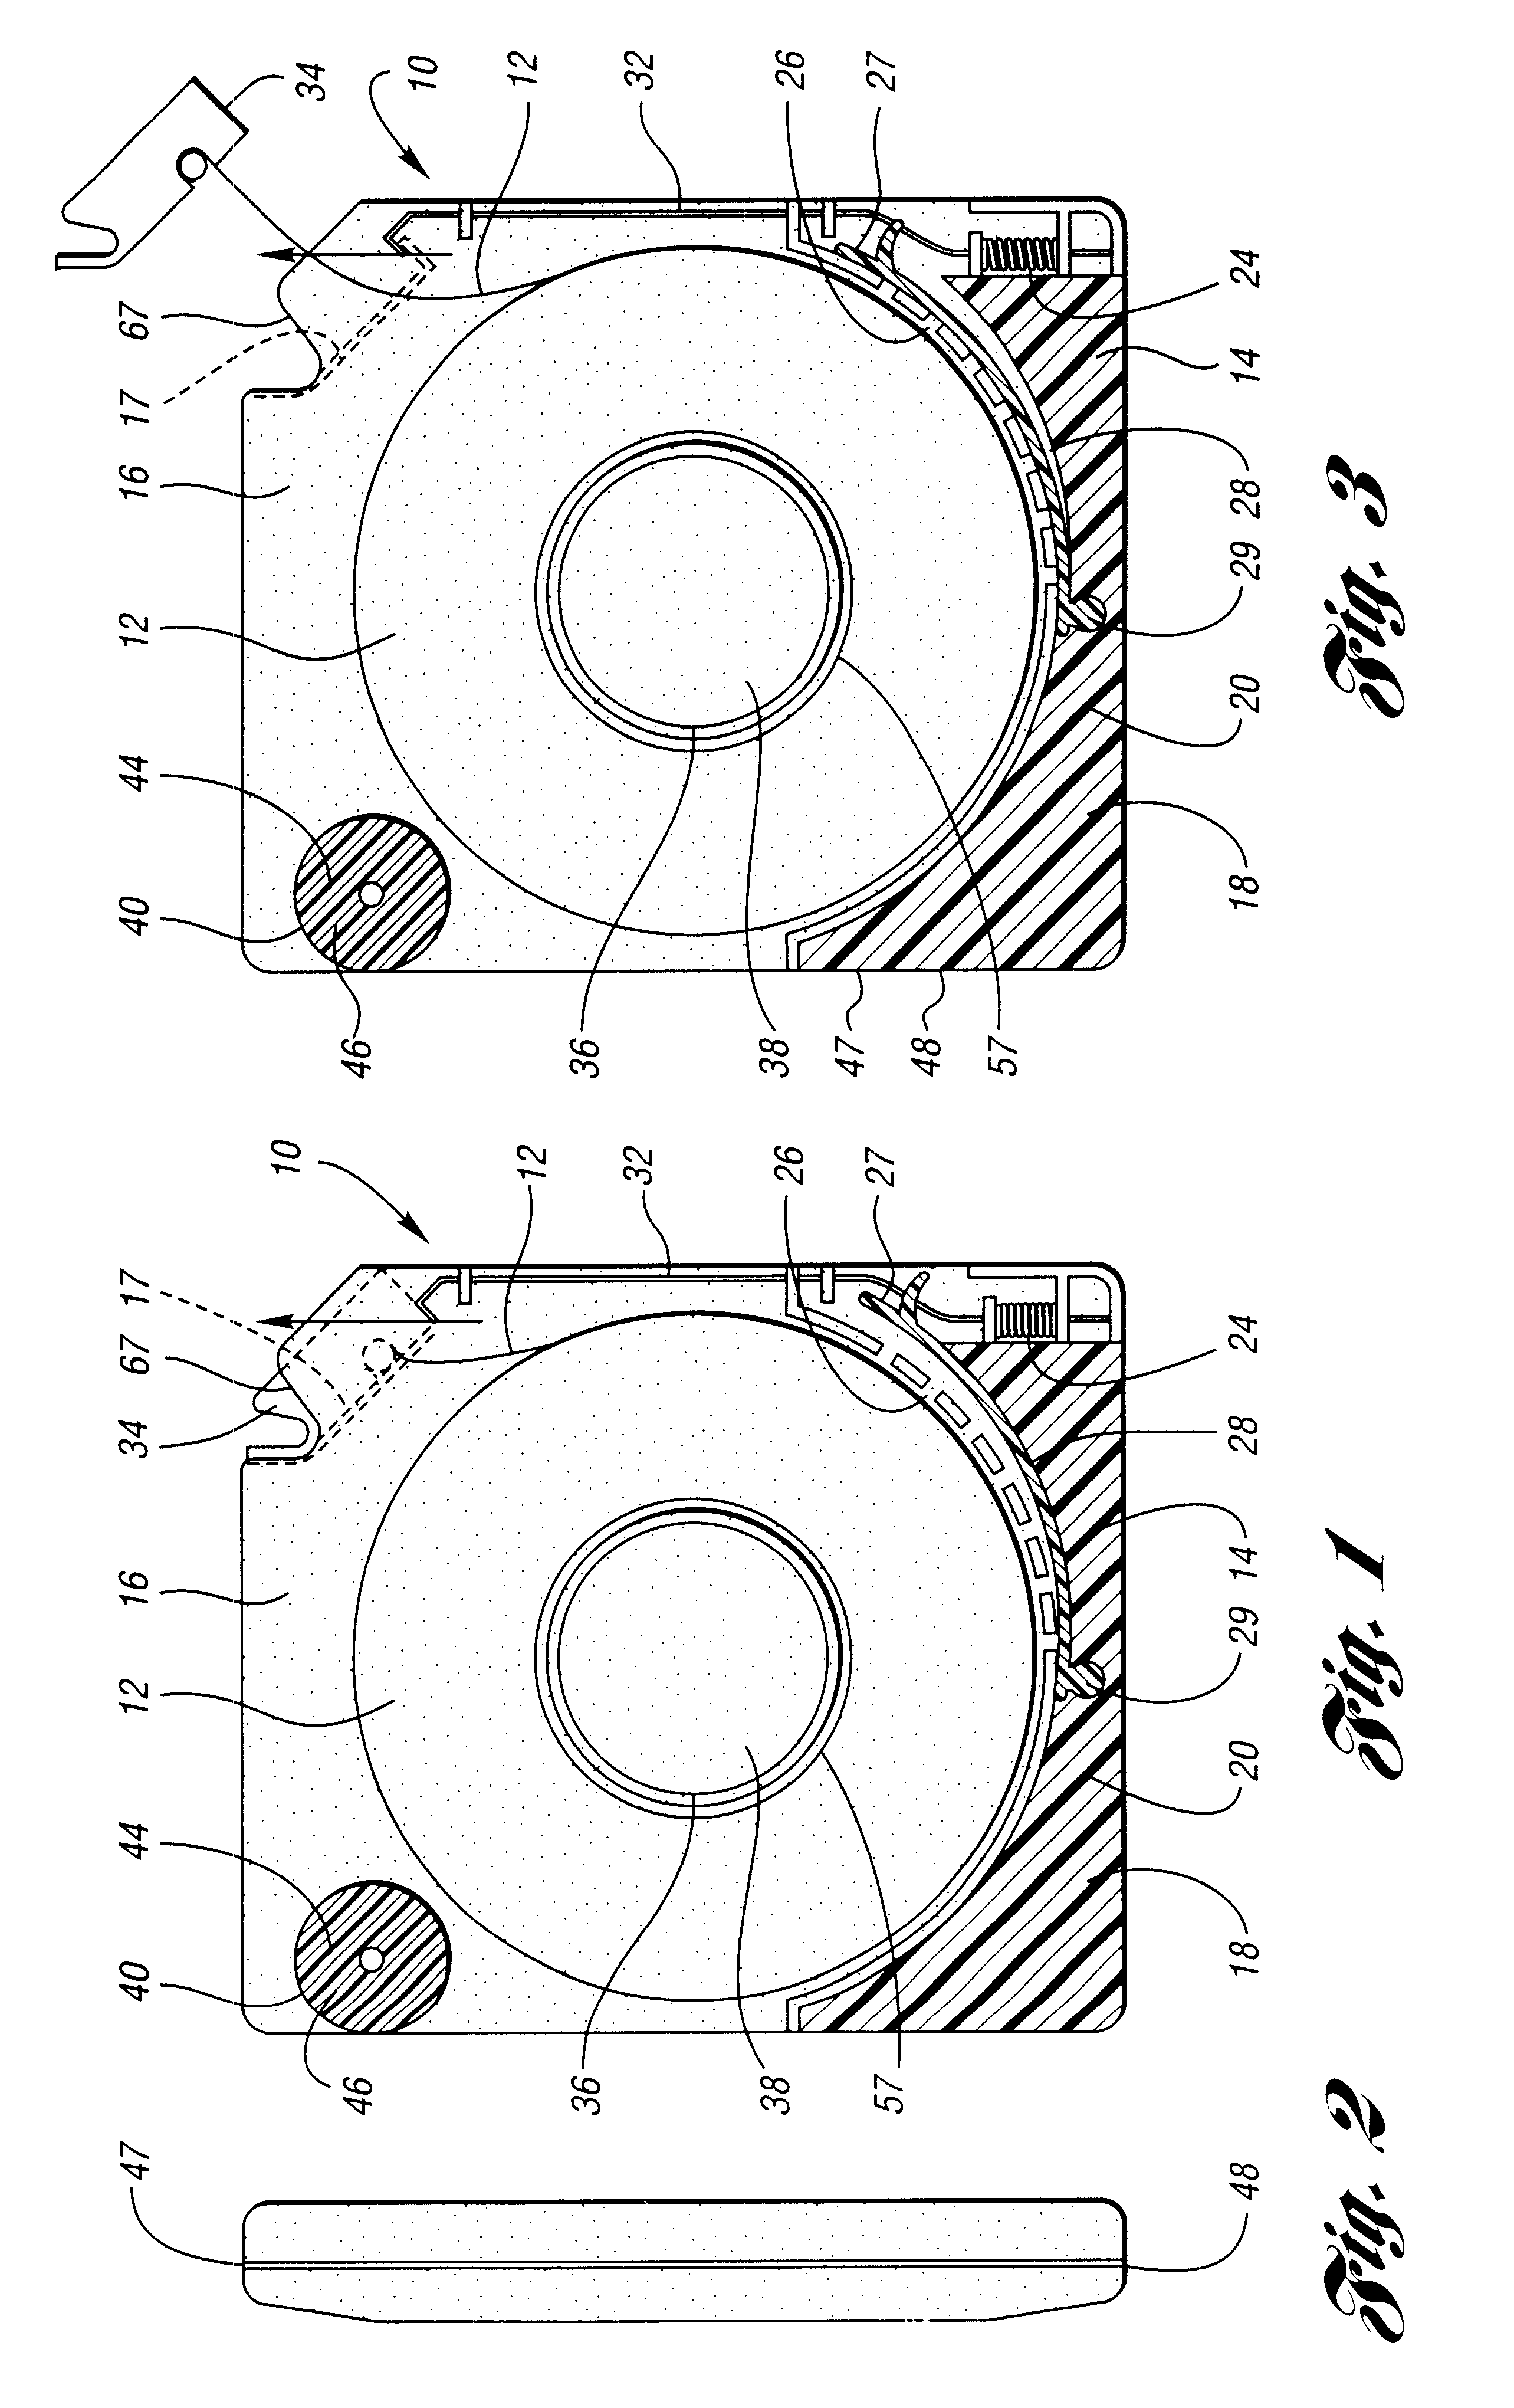 Dual chambered environmentally controlled cartridge and method for protecting data storage media